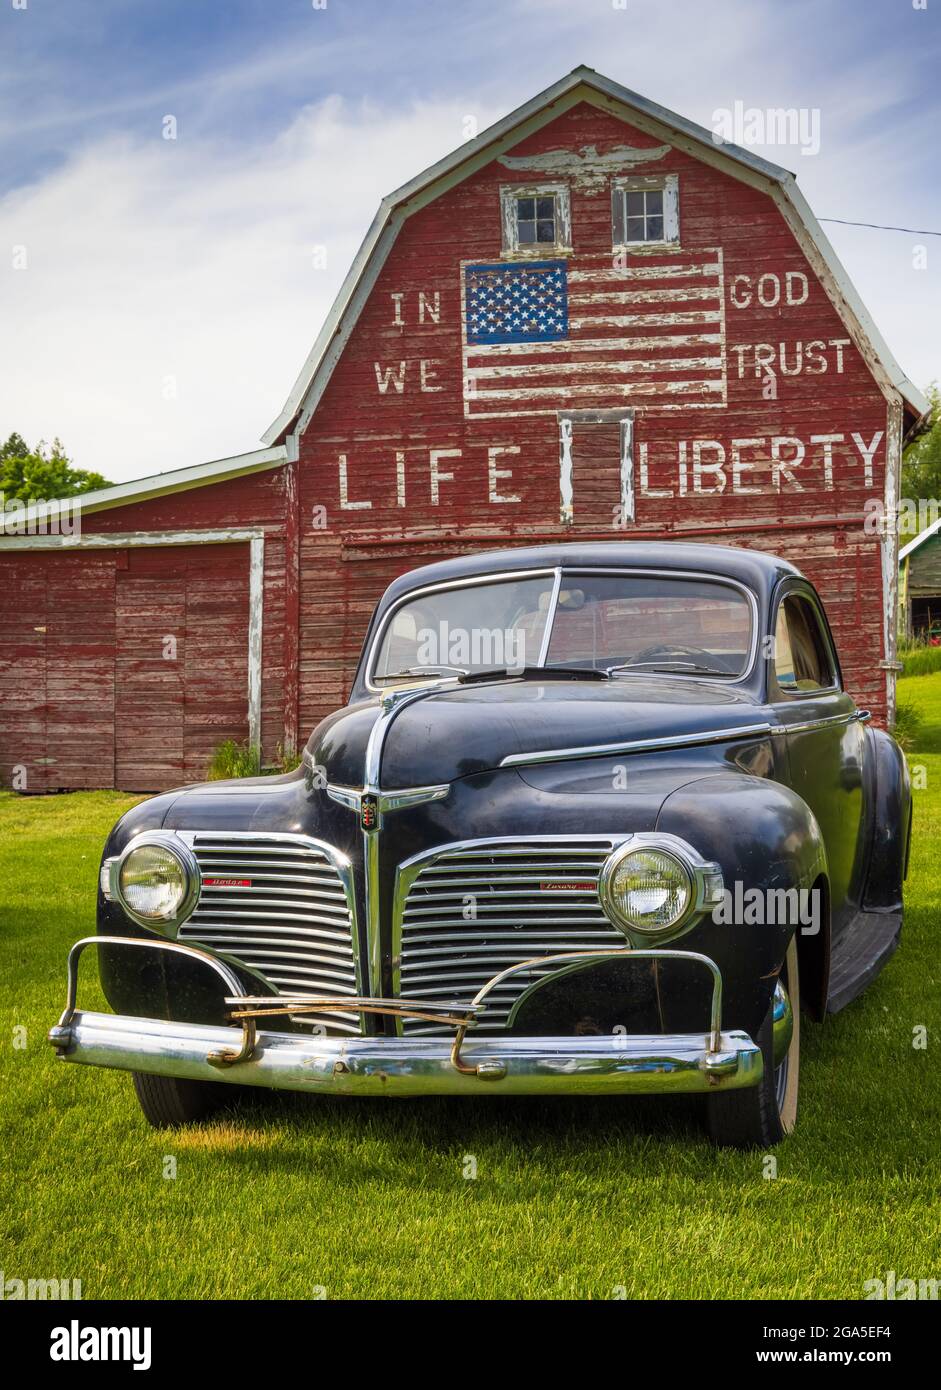 Vintage car in front of the 'In god we trust' barn in Latah, a town in Spokane County, Washington, United States Stock Photo